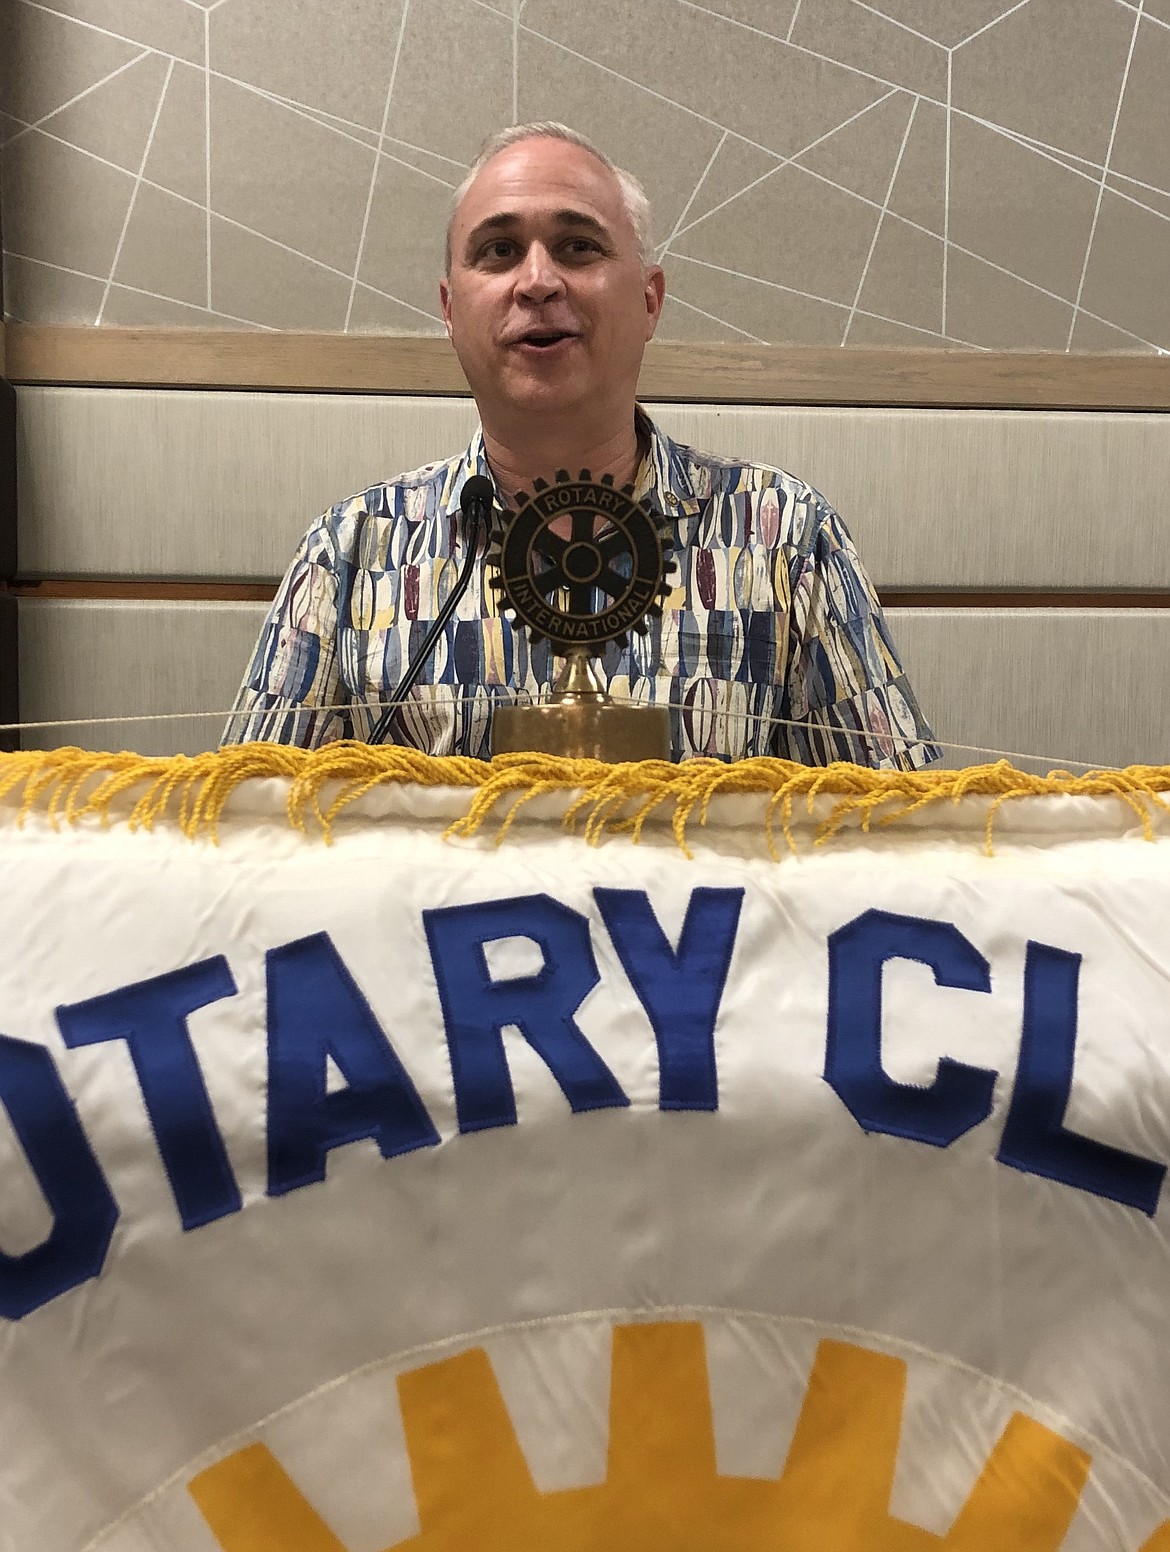 Clint Schroeder shared his Rotary story with a full crowd, July 9. Having traveled to 19 countries with the Rotary Club, Schroeder talked about the club's humanitarian work.